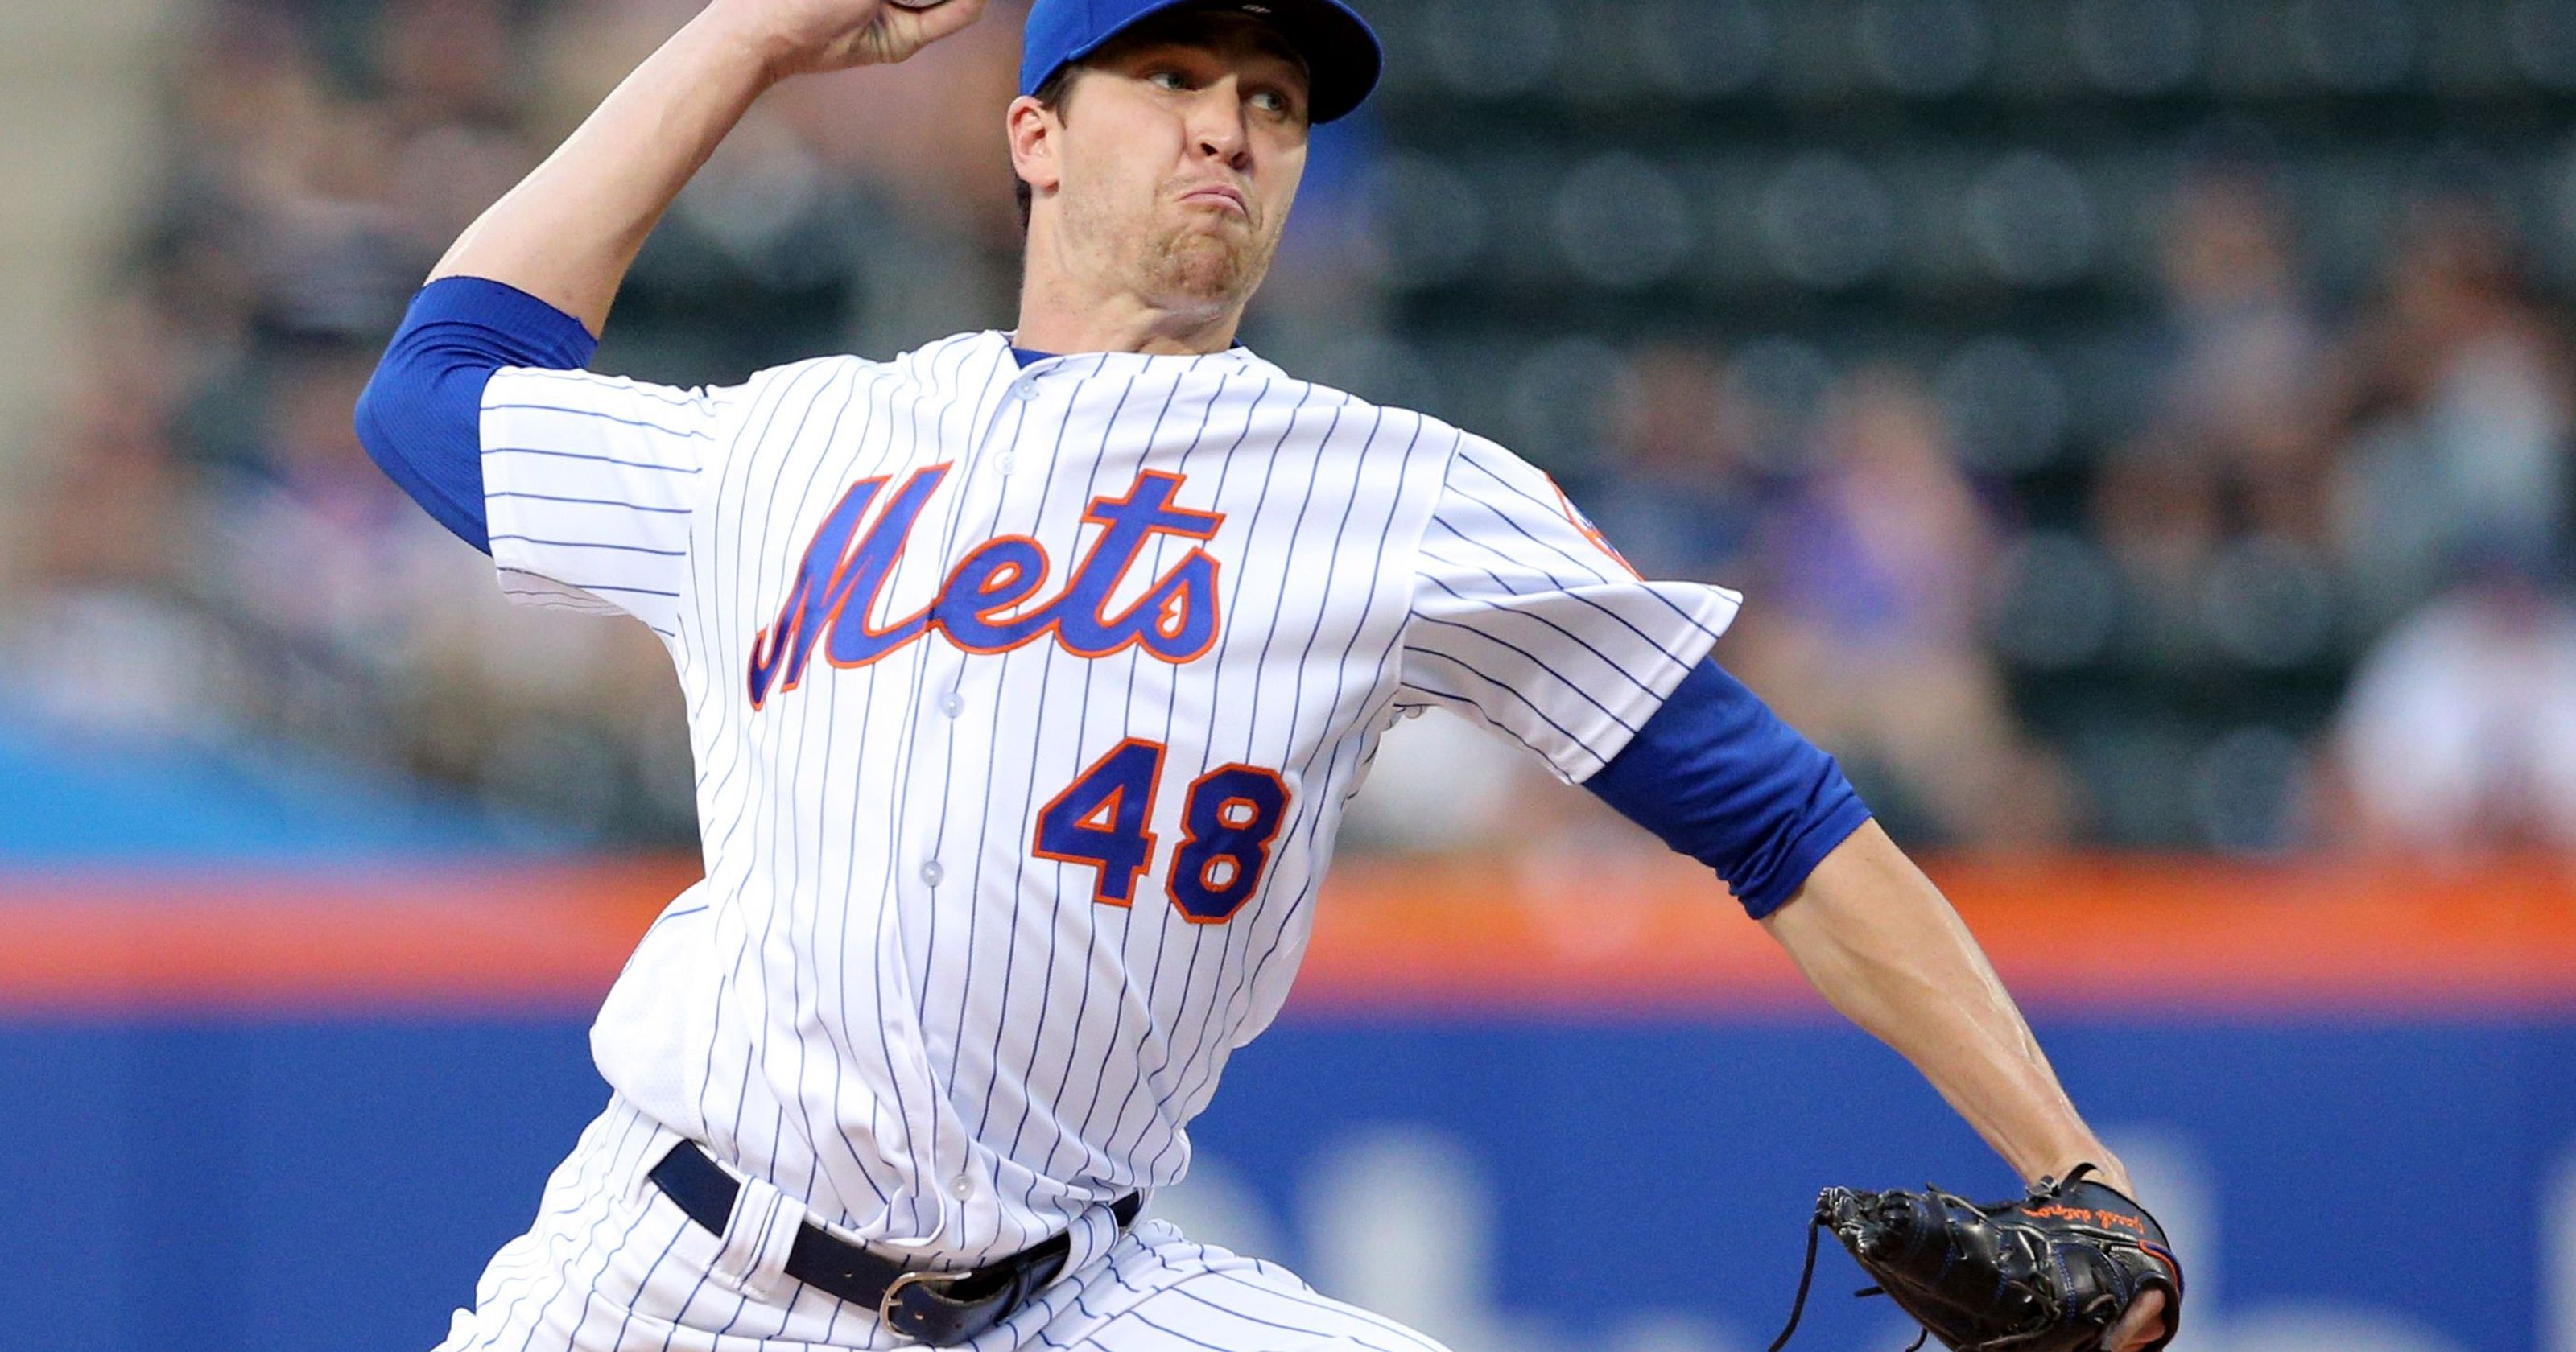 Monday Mets: The Case For Keeping deGrom